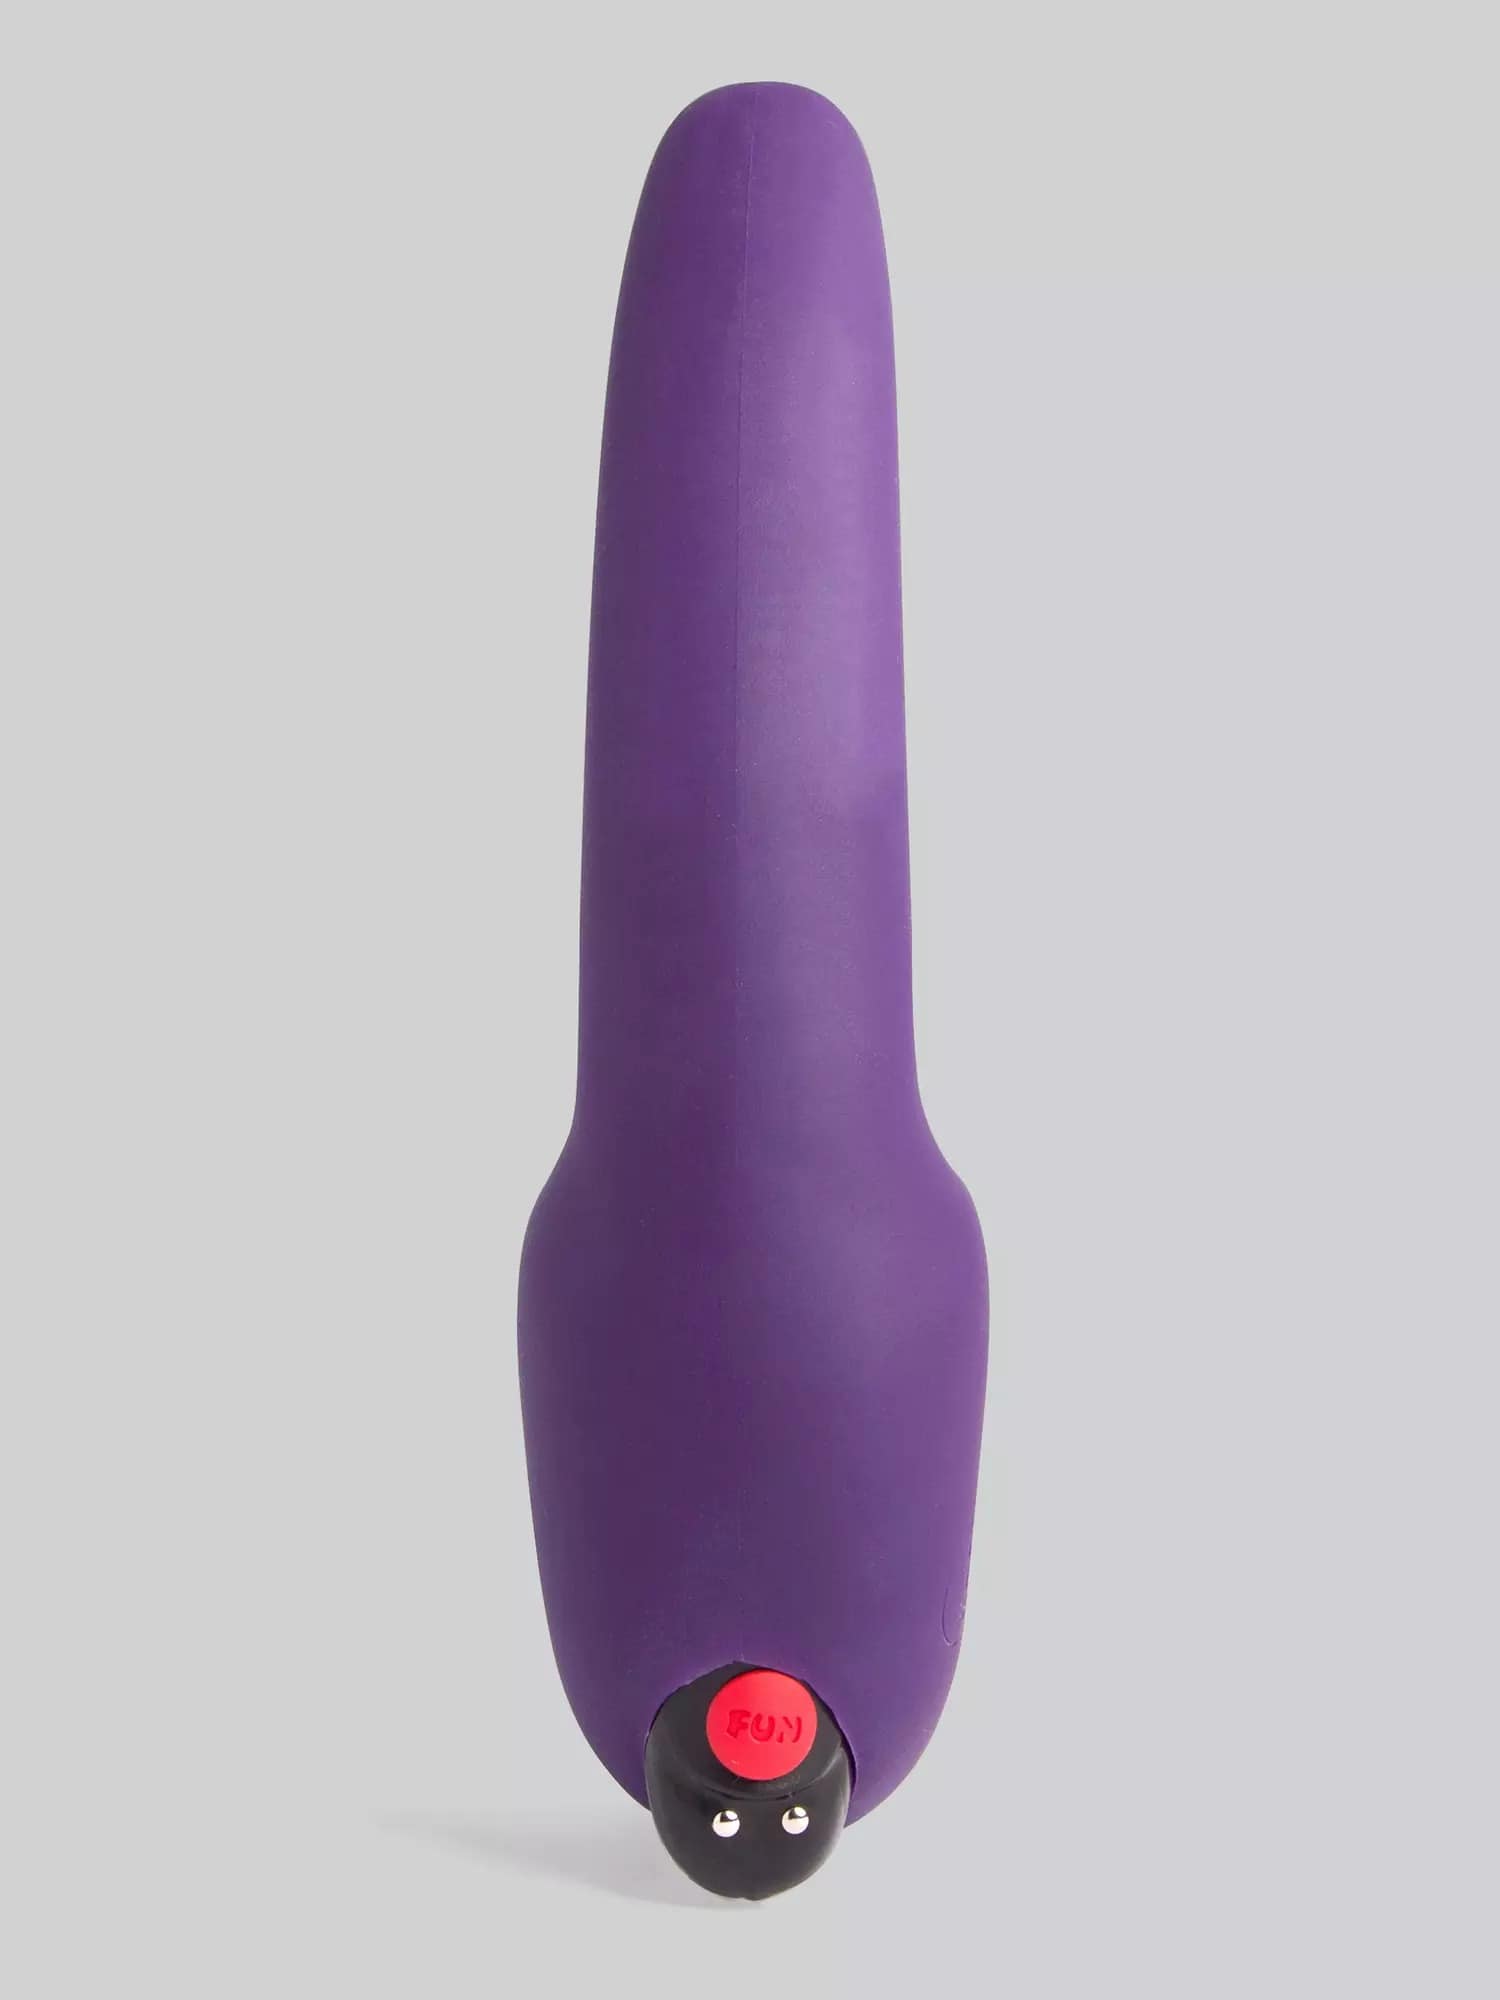 Fun Factory ShareVibe Rechargeable Vibrating Strapless Strap-On Dildo. Slide 12